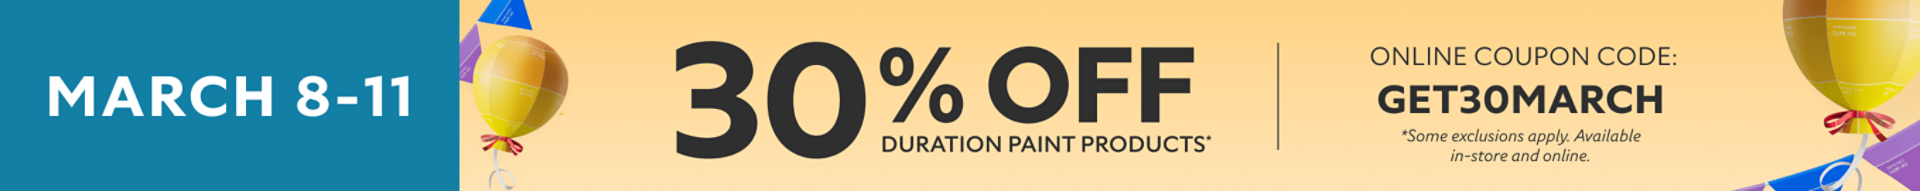 March 8-11. 30% off Duration paint products* Online coupon code: GET30MARCH *Some exclusions apply. Available in-store and online.